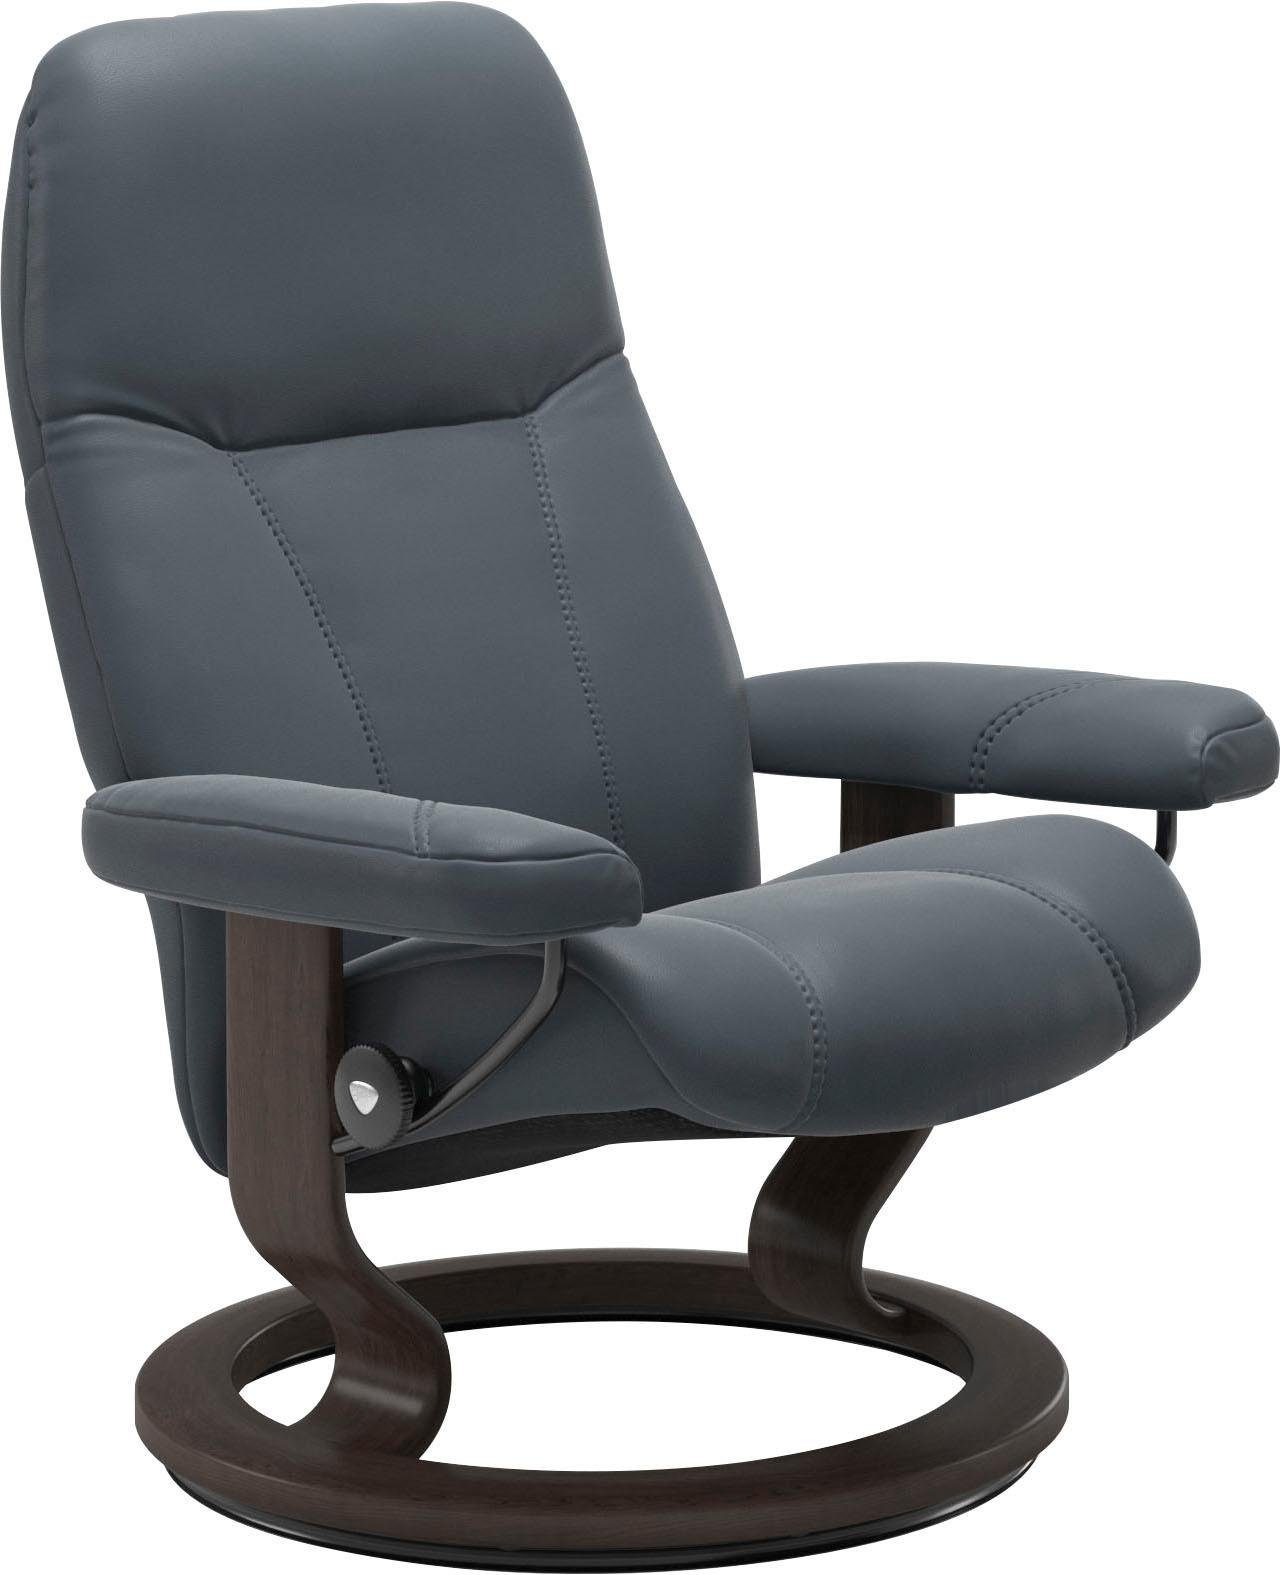 Größe Relaxsessel M, Consul, Gestell Classic Wenge mit Base, Stressless®